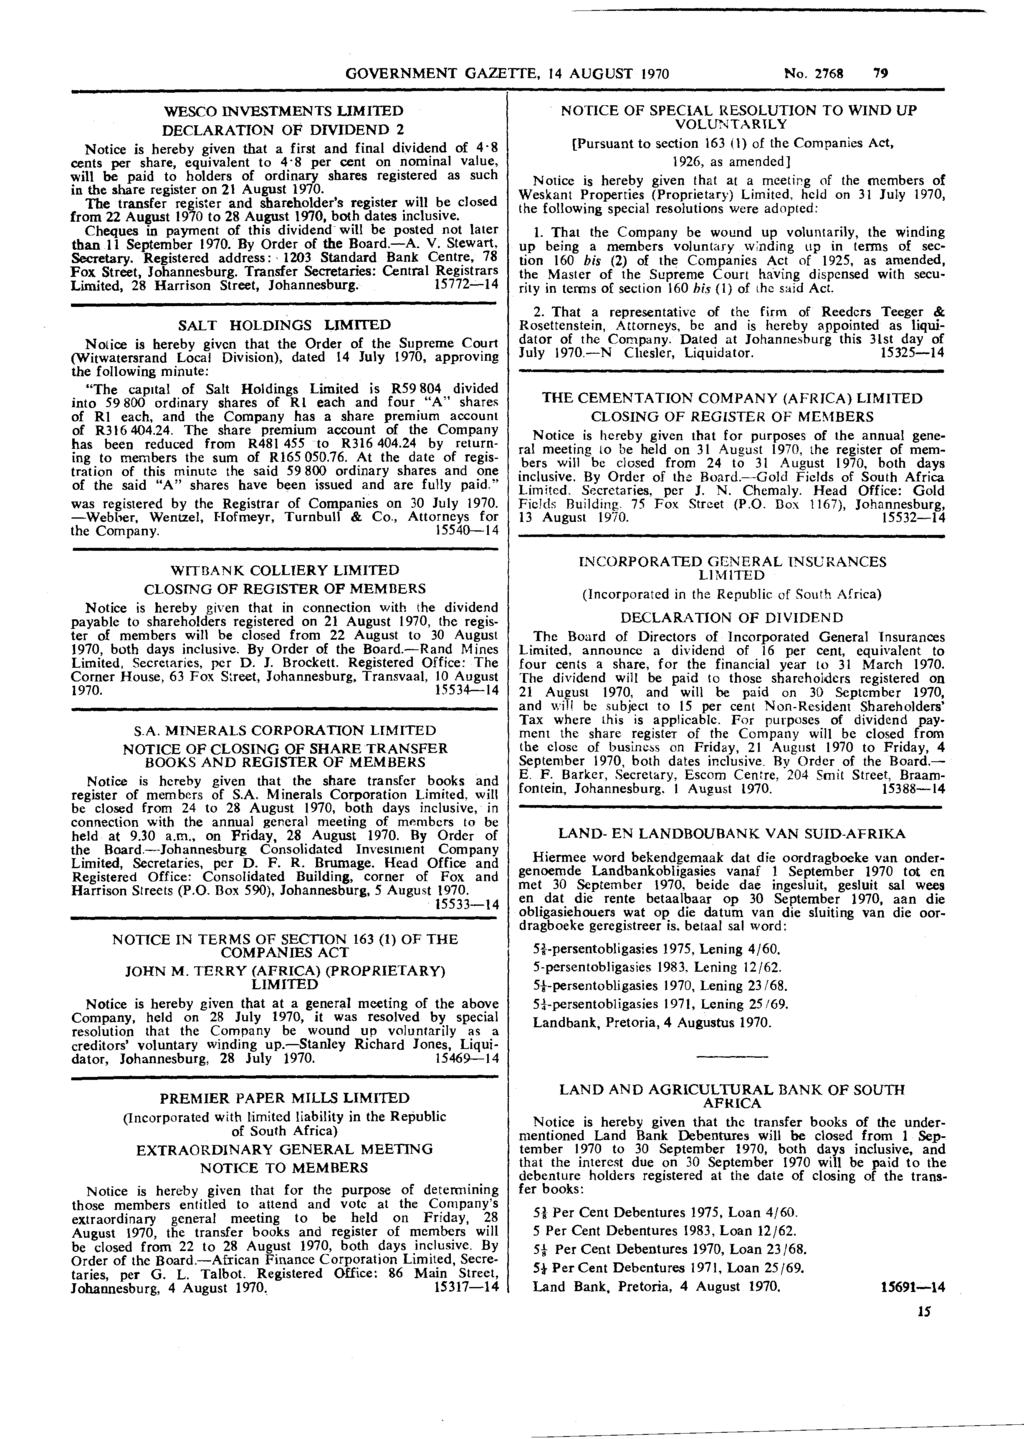 GOVERNMENT GAZETTE, 14 AUGUST 1970 No. 2768 79 WESCO MVESTMENTS LIMIED DECLARATION OF DNIDEND 2 Notice is hereby given that a first and final dividend of 4.8 cents per share, equivalent to 4.